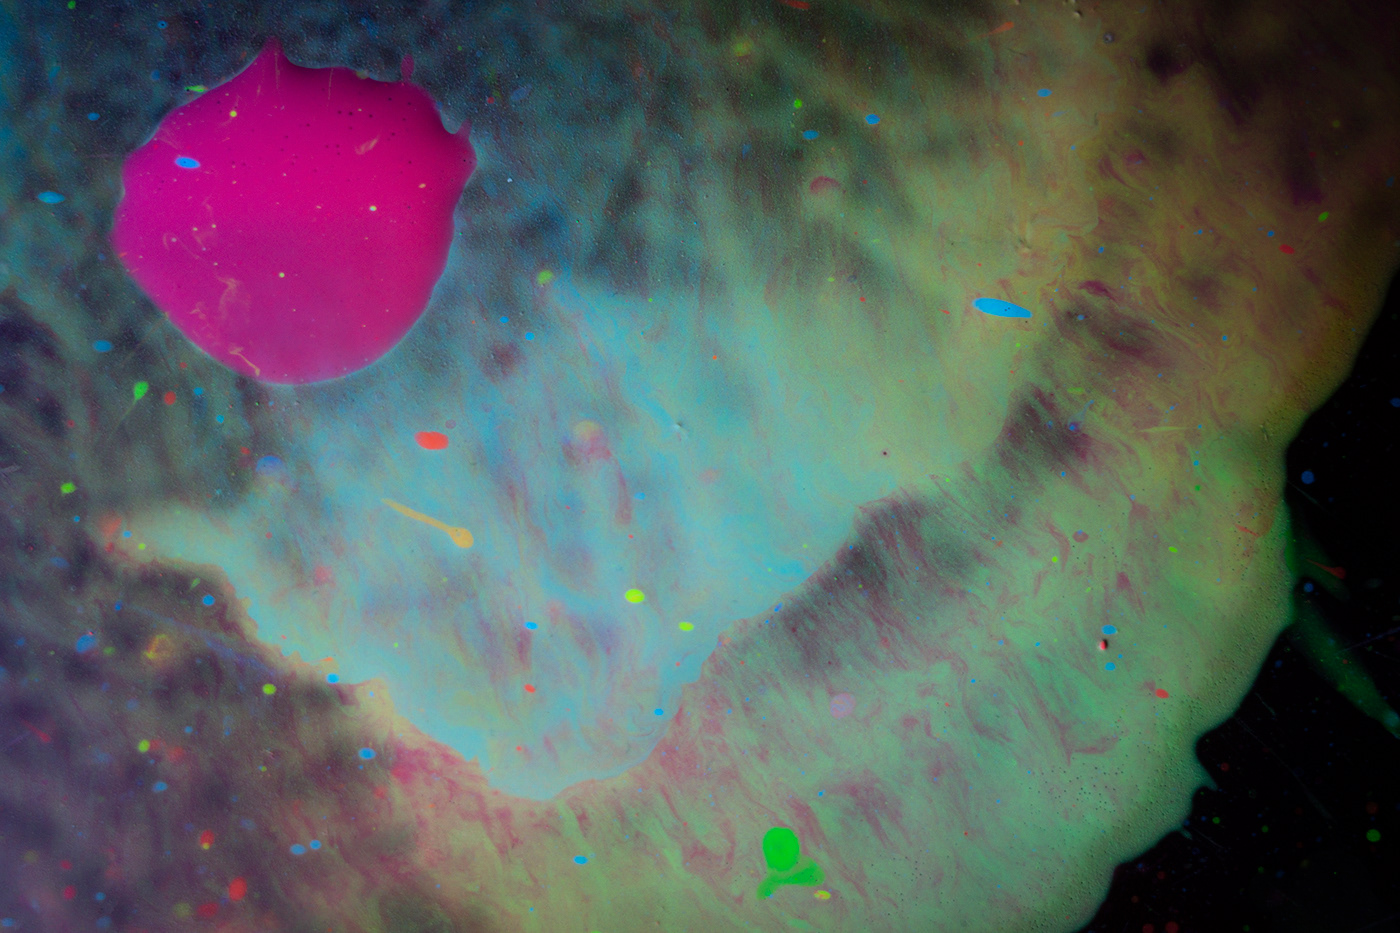 Nebula is a photography project by UViolet and Ruben, using paint and ultraviolet light